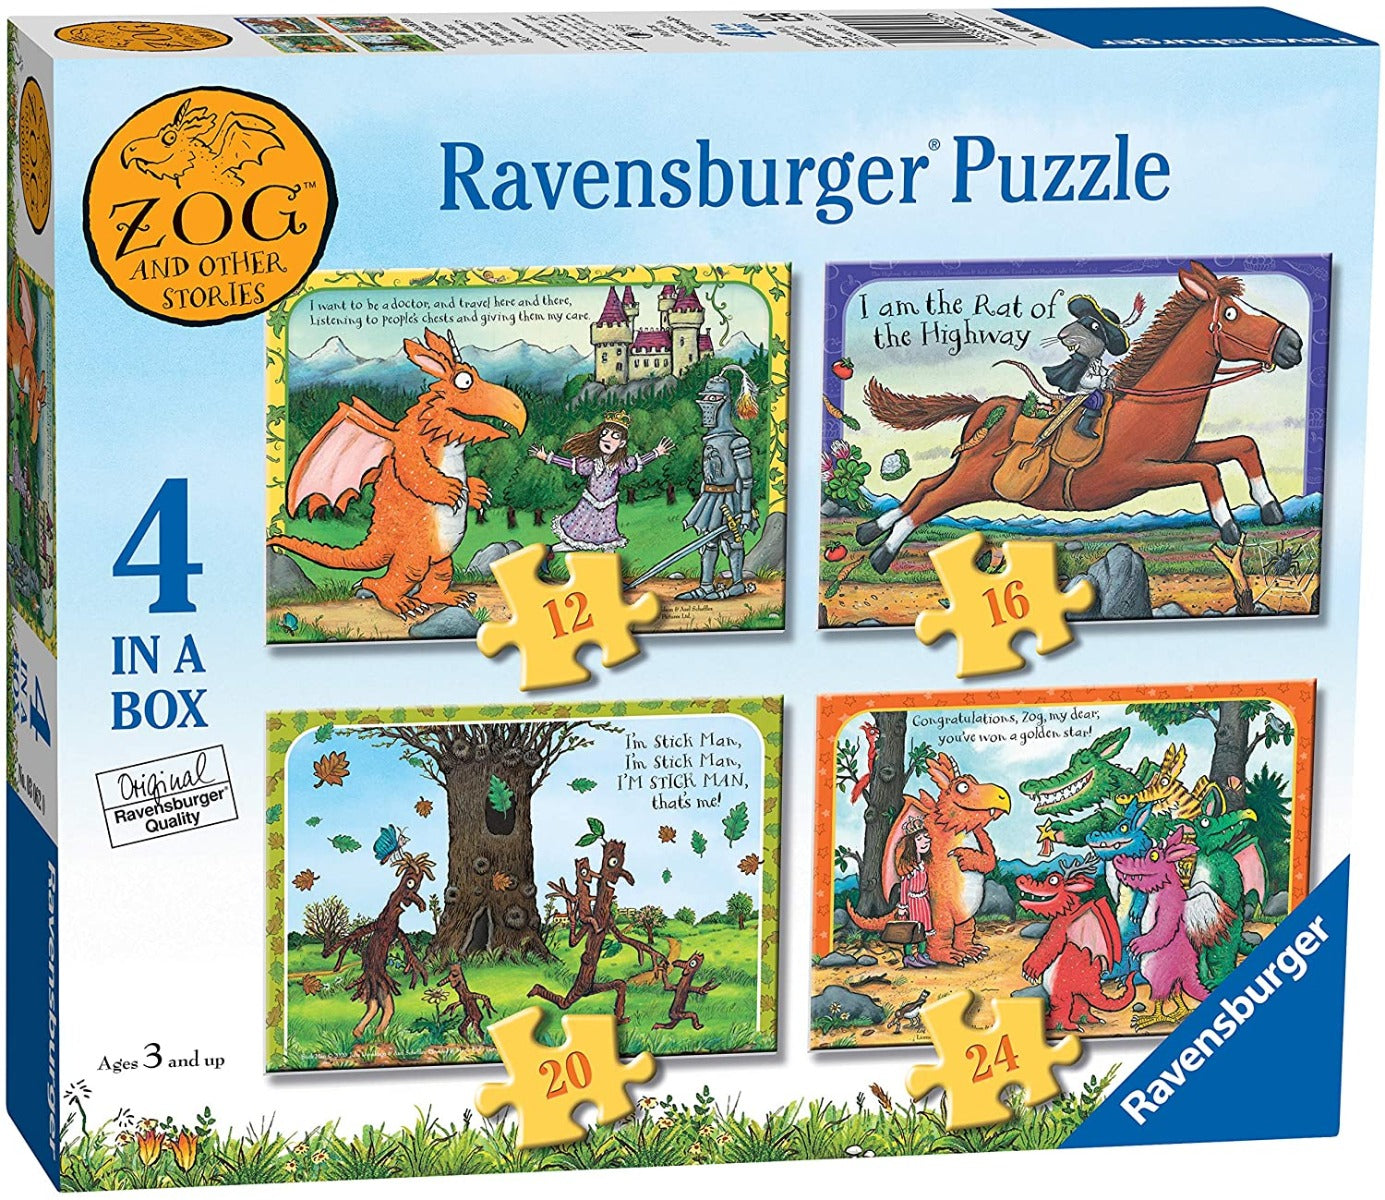 Ravensburger Zog and Other Stories 4 In Box (12, 16, 20, 24 Piece) Jigsaw Puzzles